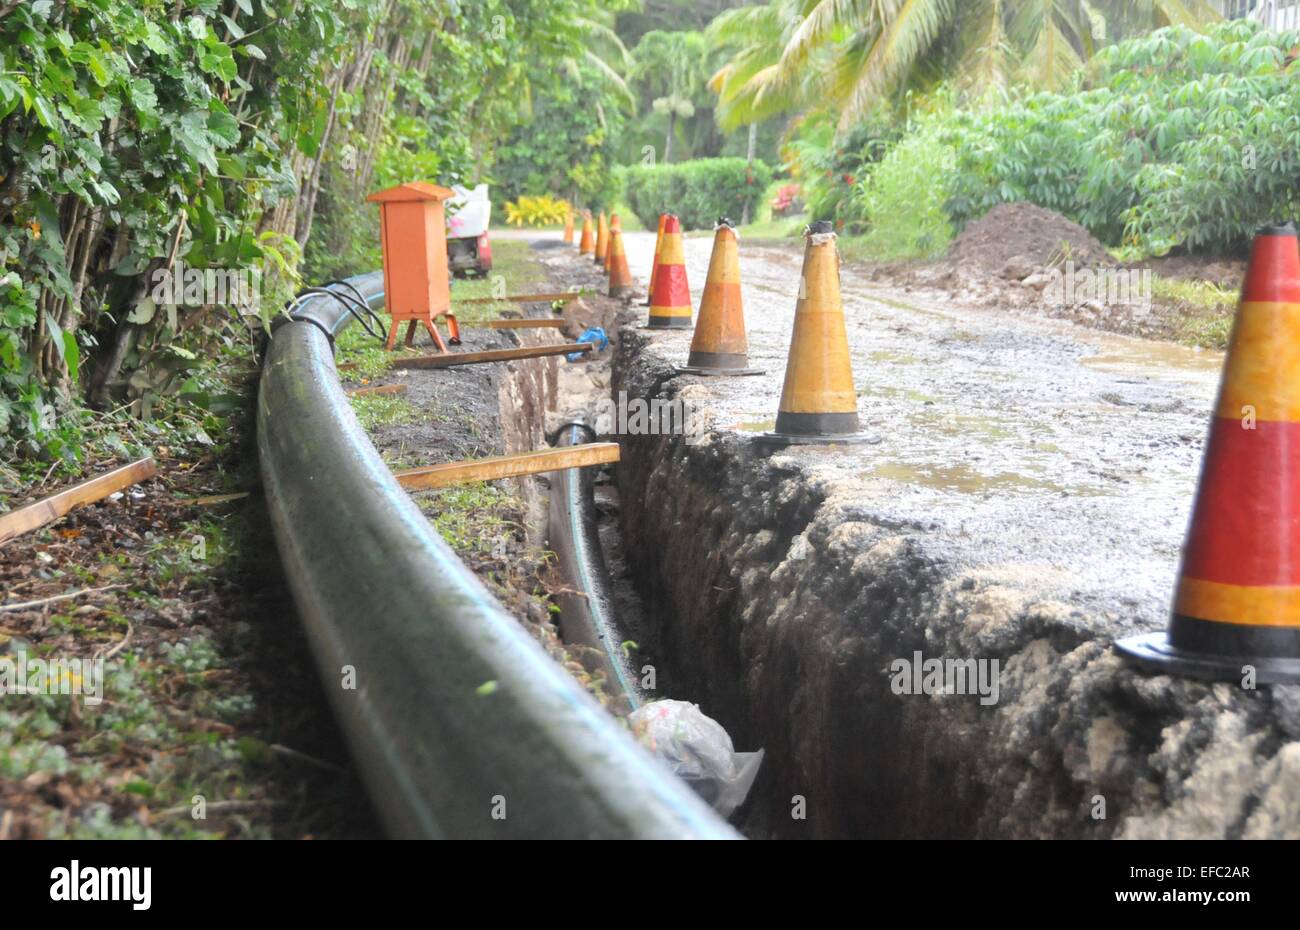 (150131) -- RAROTONGA, Cook Islands, 2015 (Xinhua) -- Photo taken on Jan. 29, 2015 shows a Chinese company's construction site of the Rarotonga water project in Rarotonga, the Cook Islands' main island. China, New Zealand and Cook Islands jointly launched the construction of a water infrastructure project aiming to deliver an improved water main system to the people of Rarotonga in February 2014. (Xinhua/Su Liang) (srb) Stock Photo